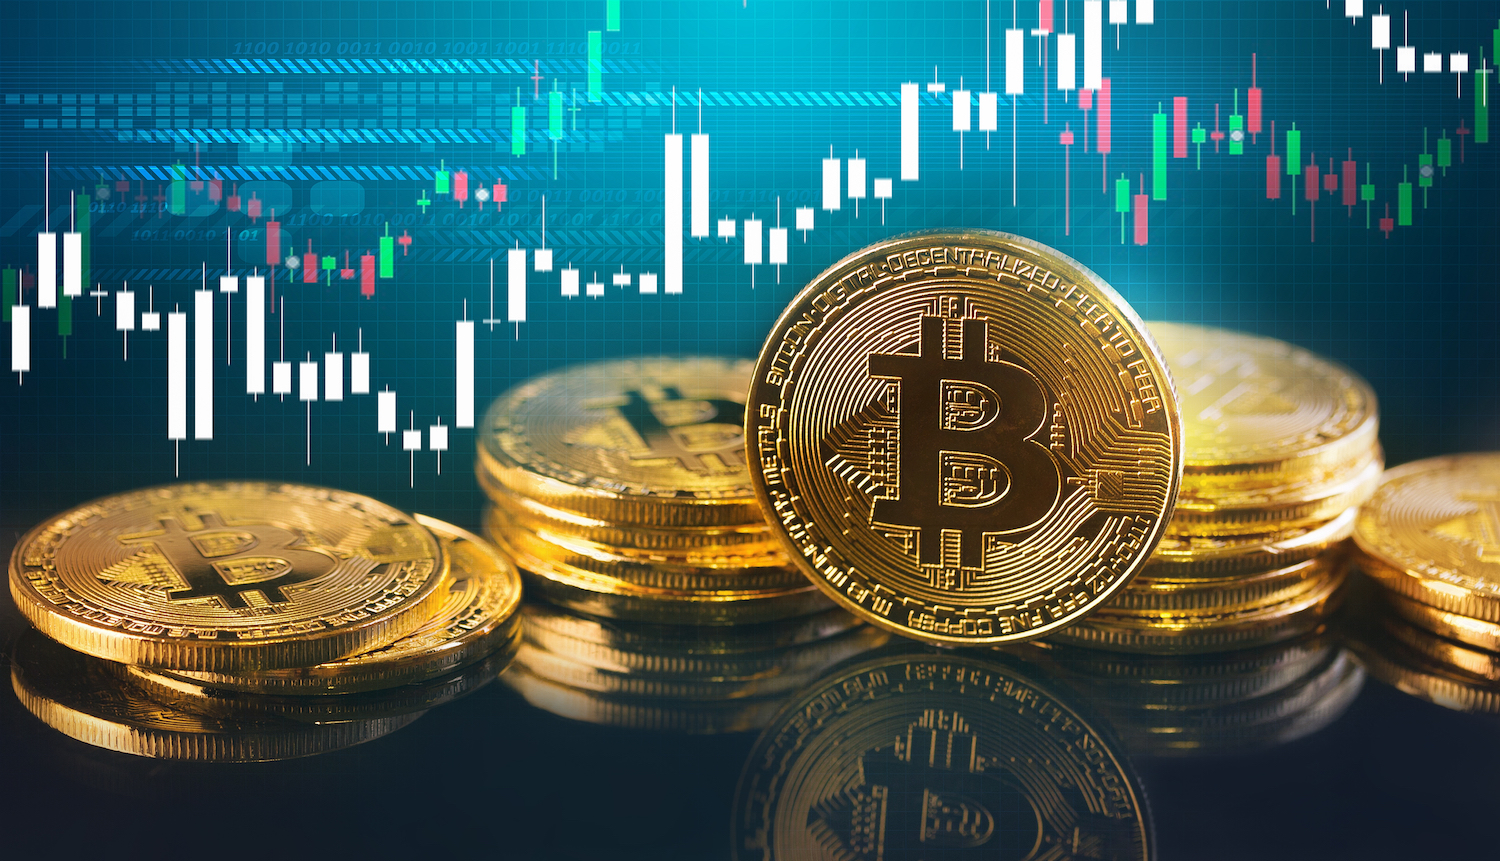 Bitcoin Price Posts Biggest Quarterly Gain Since Late 2017